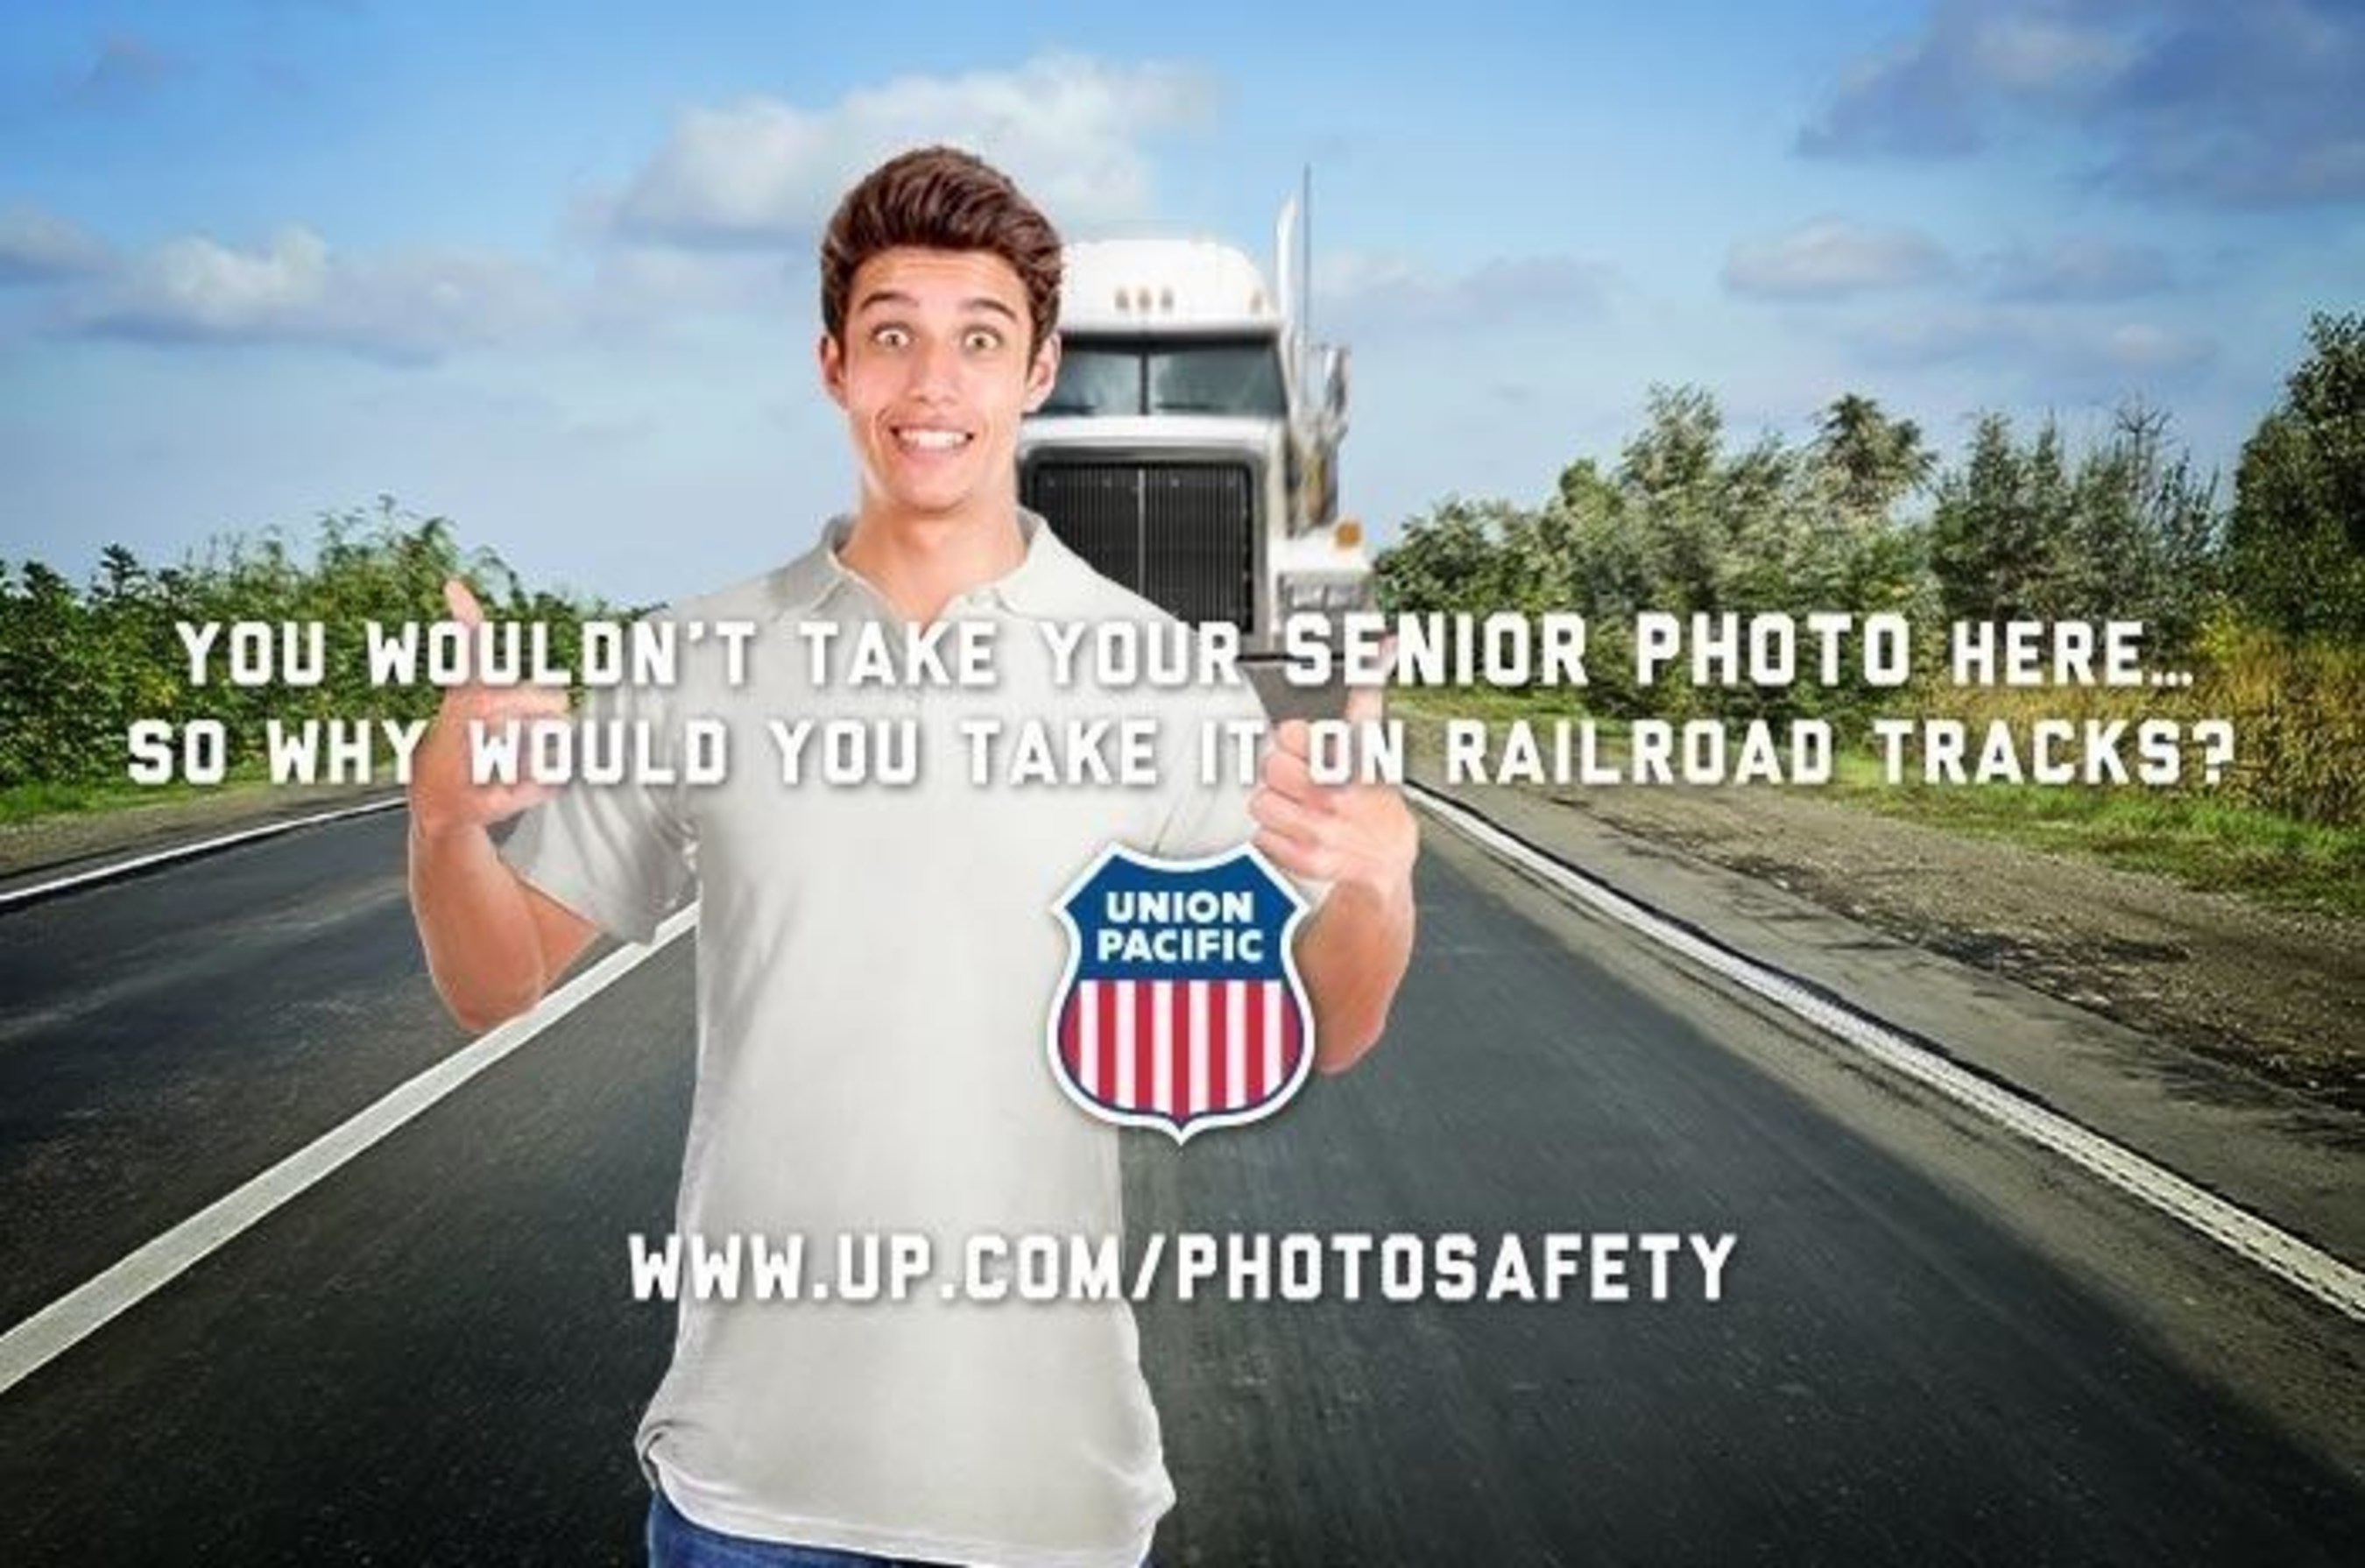 Union Pacific's High School Photo Safety Campaign Named 2016 Telly Awards Winner